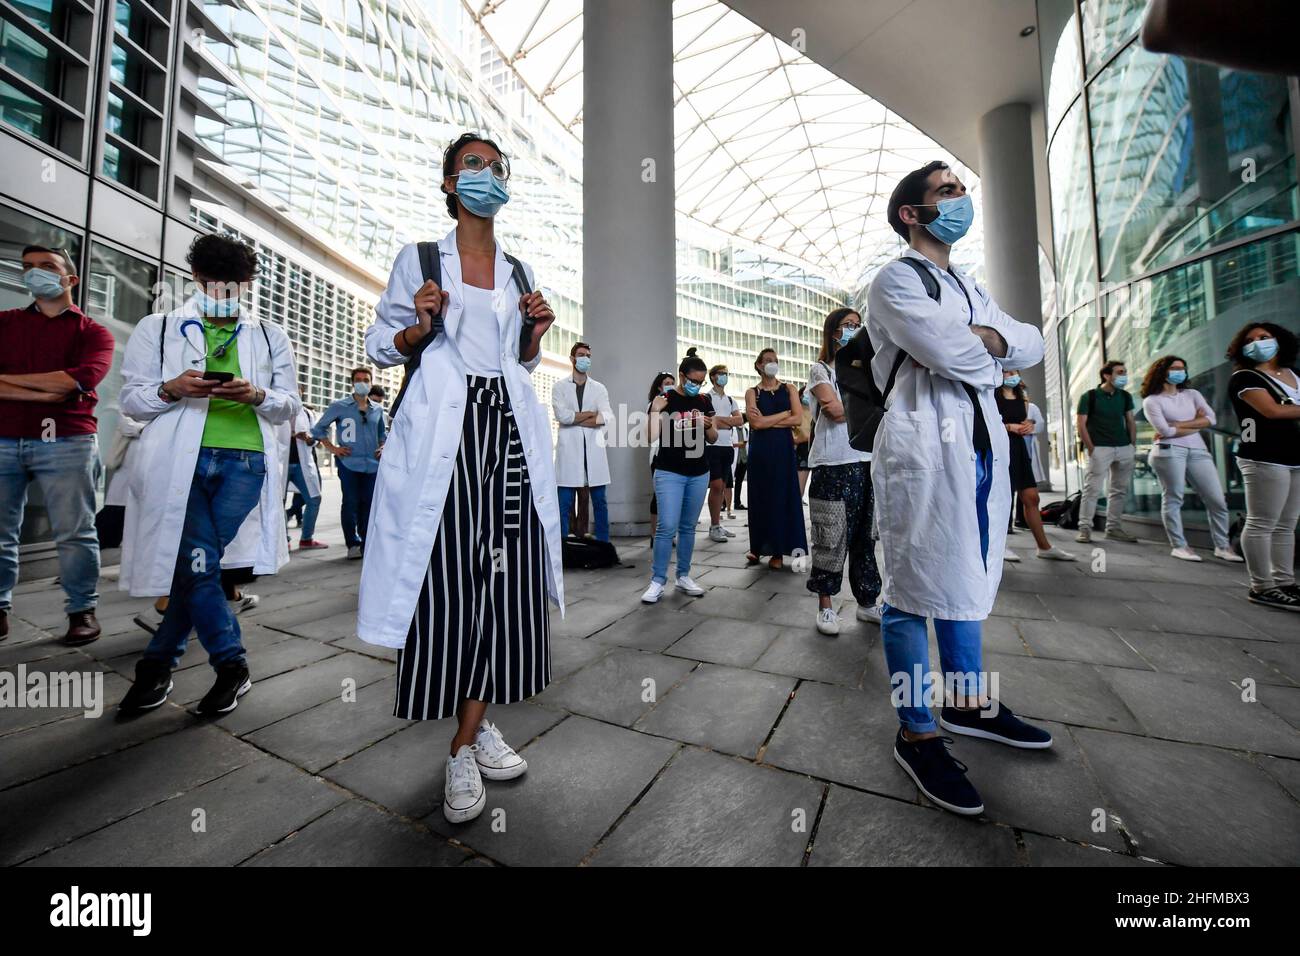 Claudio Furlan - LaPresse 22 June 2020 Milano (Italy) News Medical doctors under training demonstration for regularization after the months of the covid emergency Stock Photo